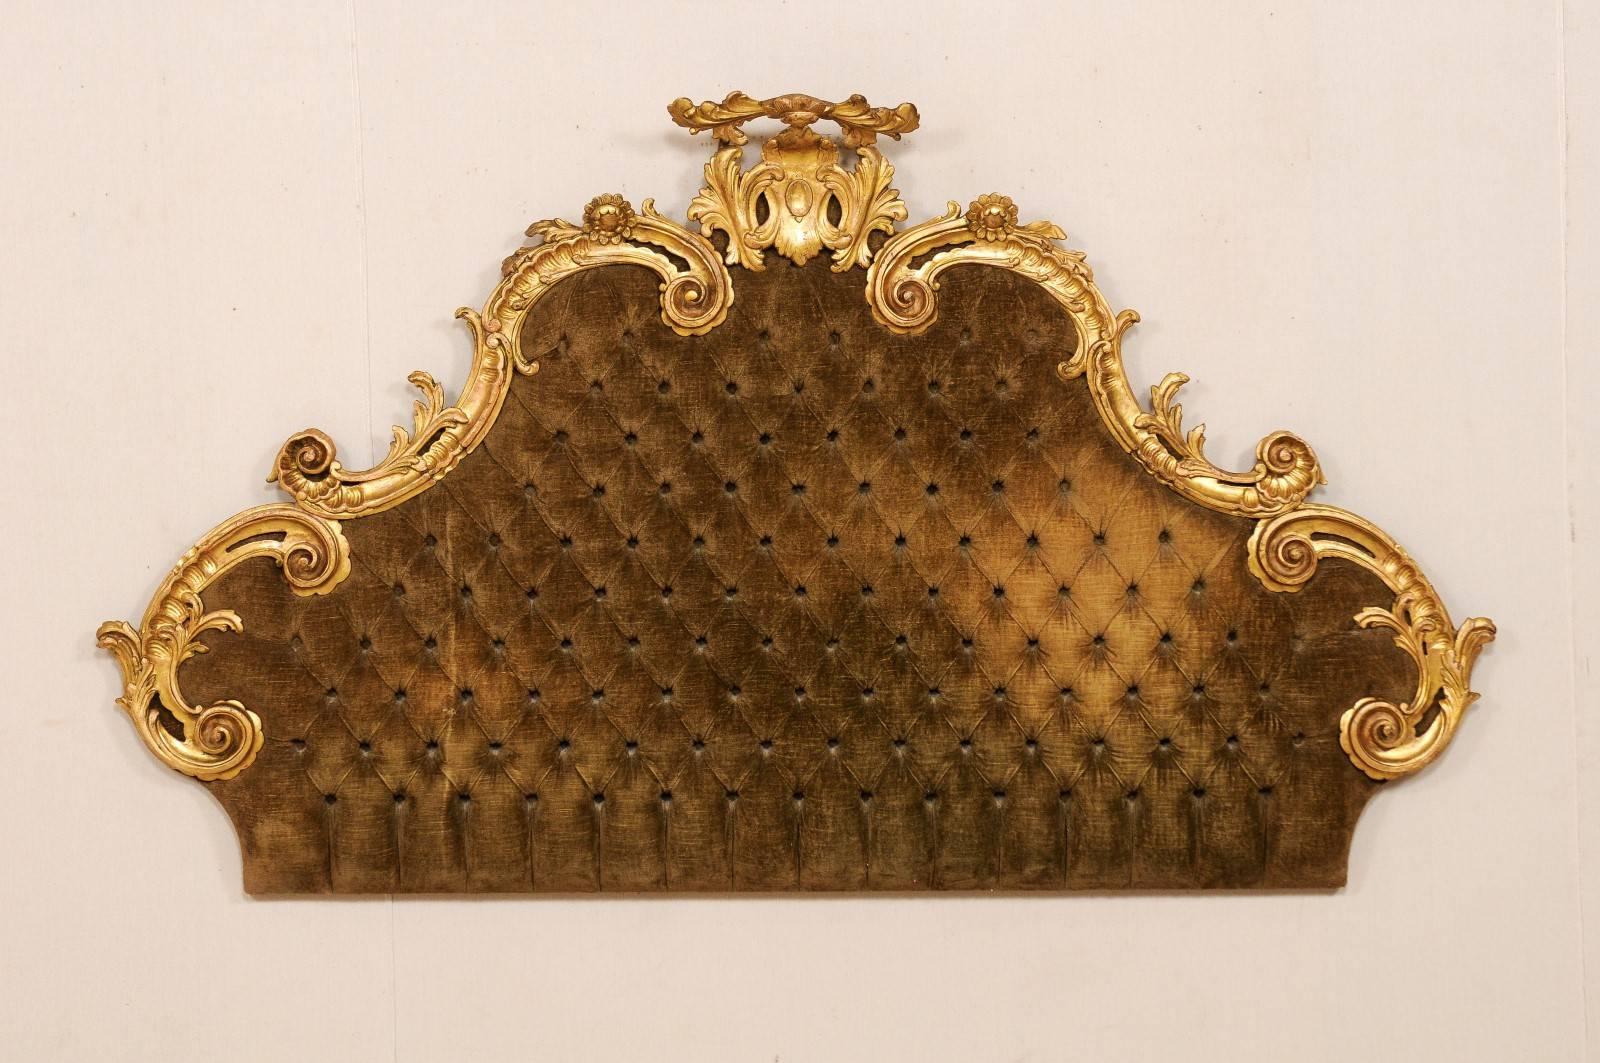 An Italian 19th century Rococo style lavishly carved and tufted headboard for bed. This opulent Italian antique headboard features a balanced giltwood carved crest of scrolling acanthus leaves with floral accents, nice pierced details and lovely